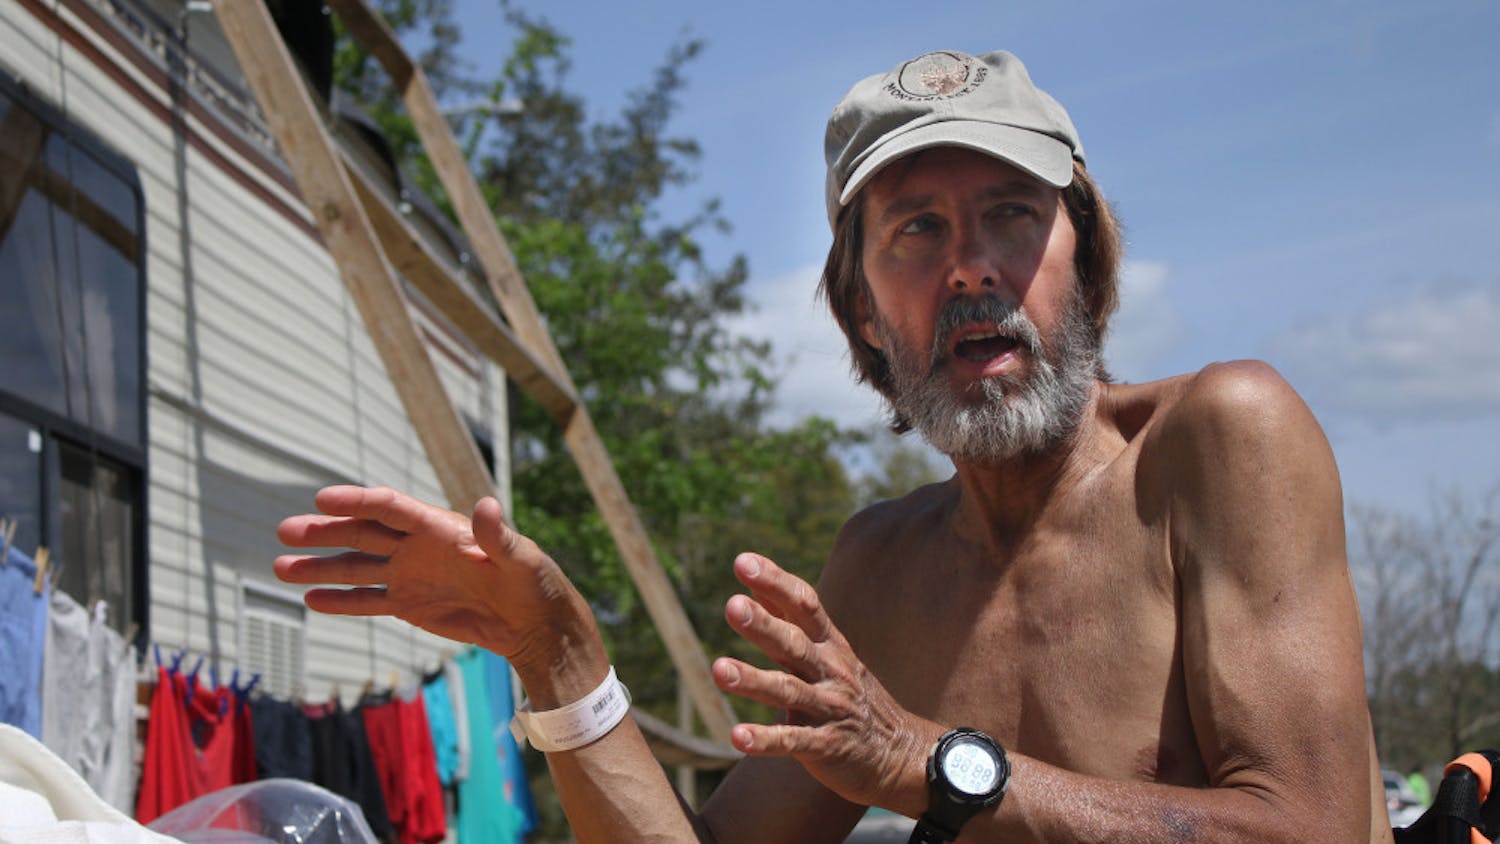 In Dignity Village, just outside the main gate of GRACE Marketplace, Mark Venzke, 62, describes his plans to renovate his motorhome so he can move out of the 6-foot tent where he currently sleeps. 